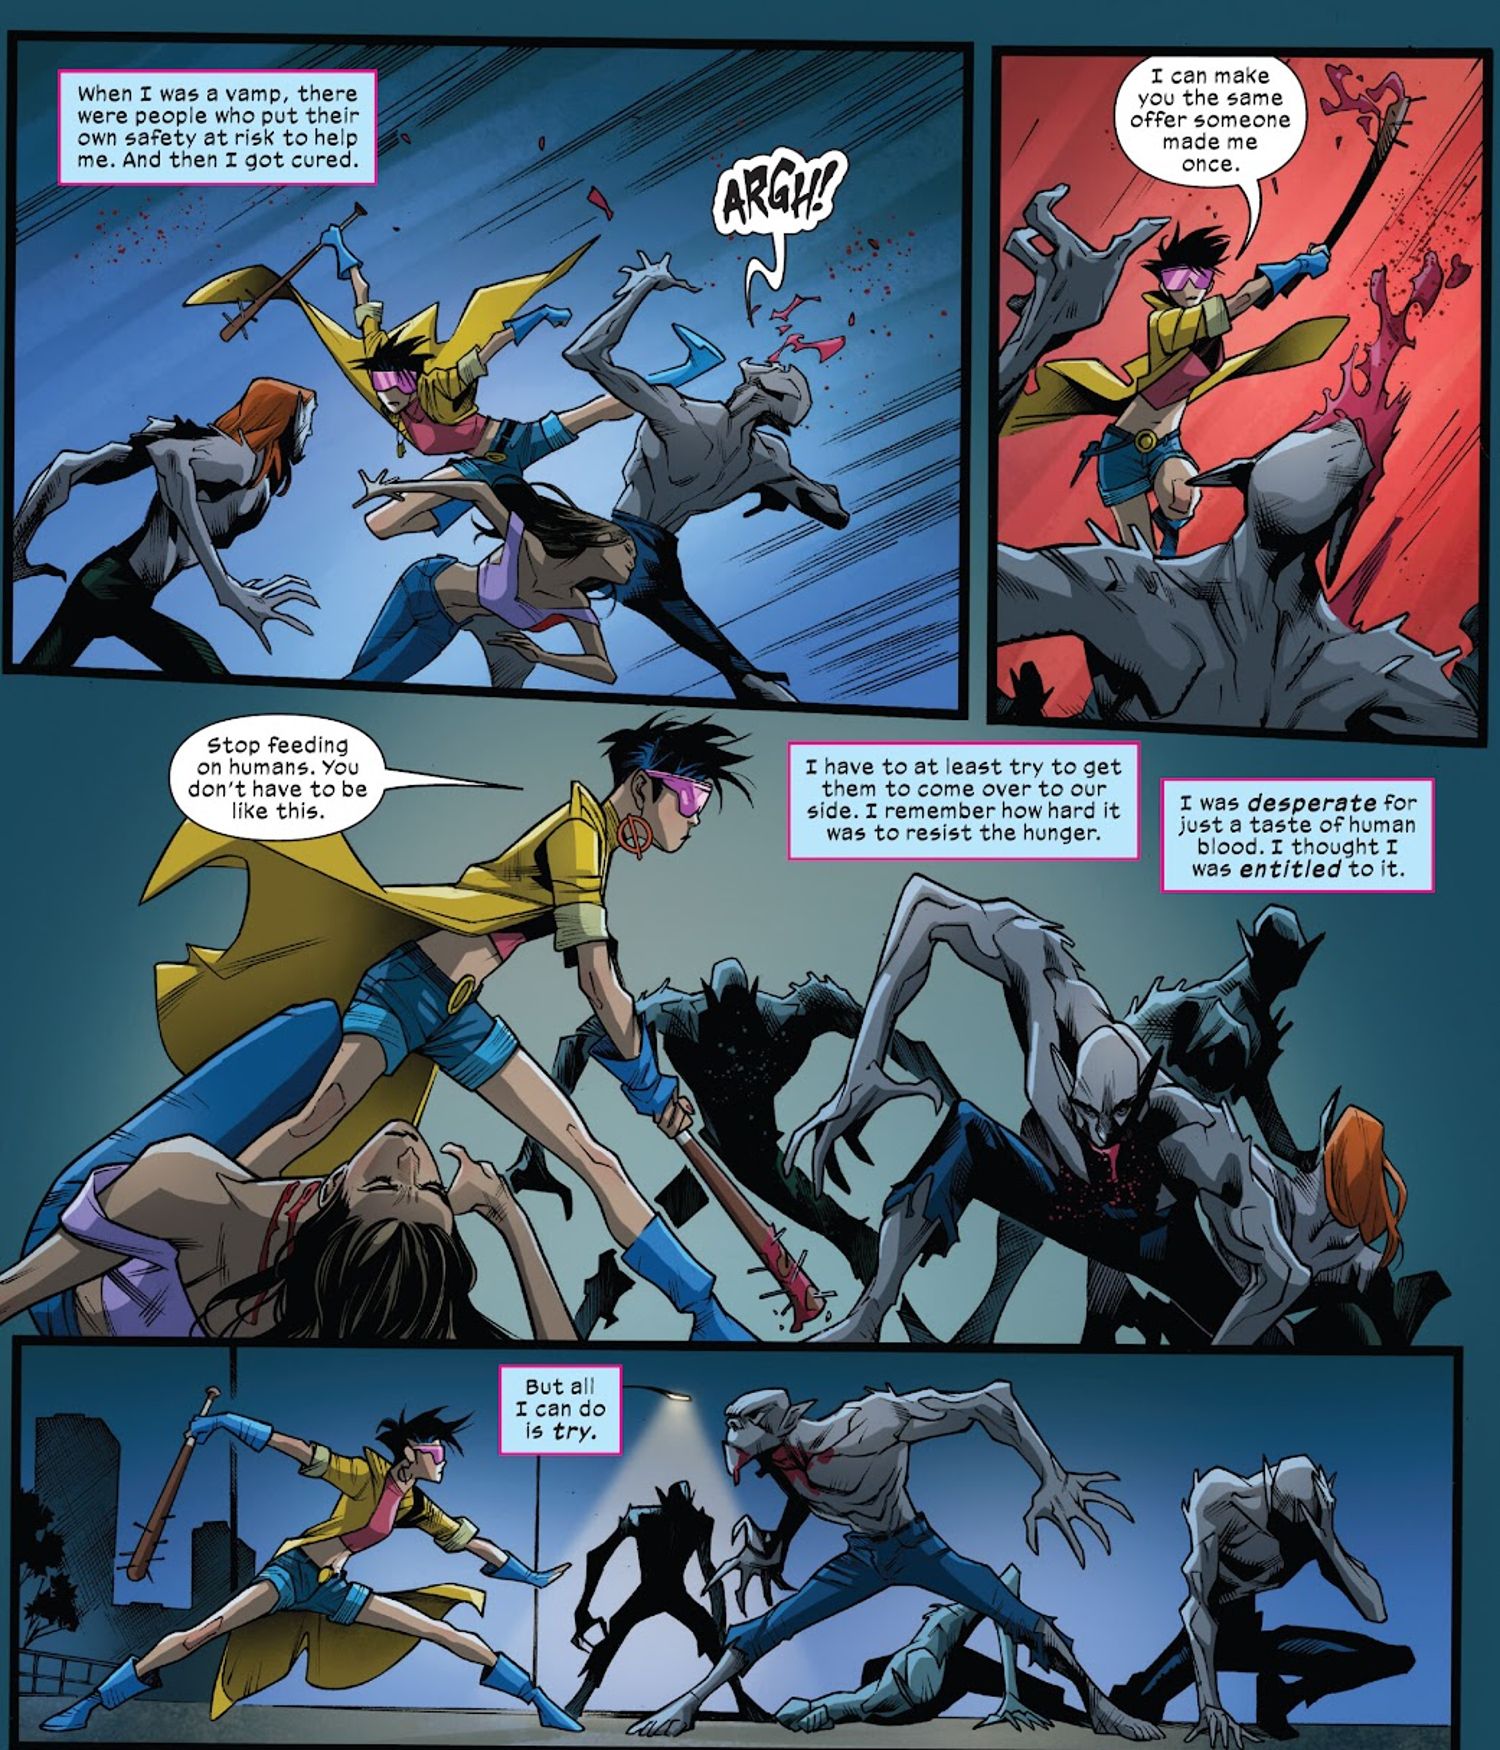 Jubilee fights vampires and offers one a way to be saved. 